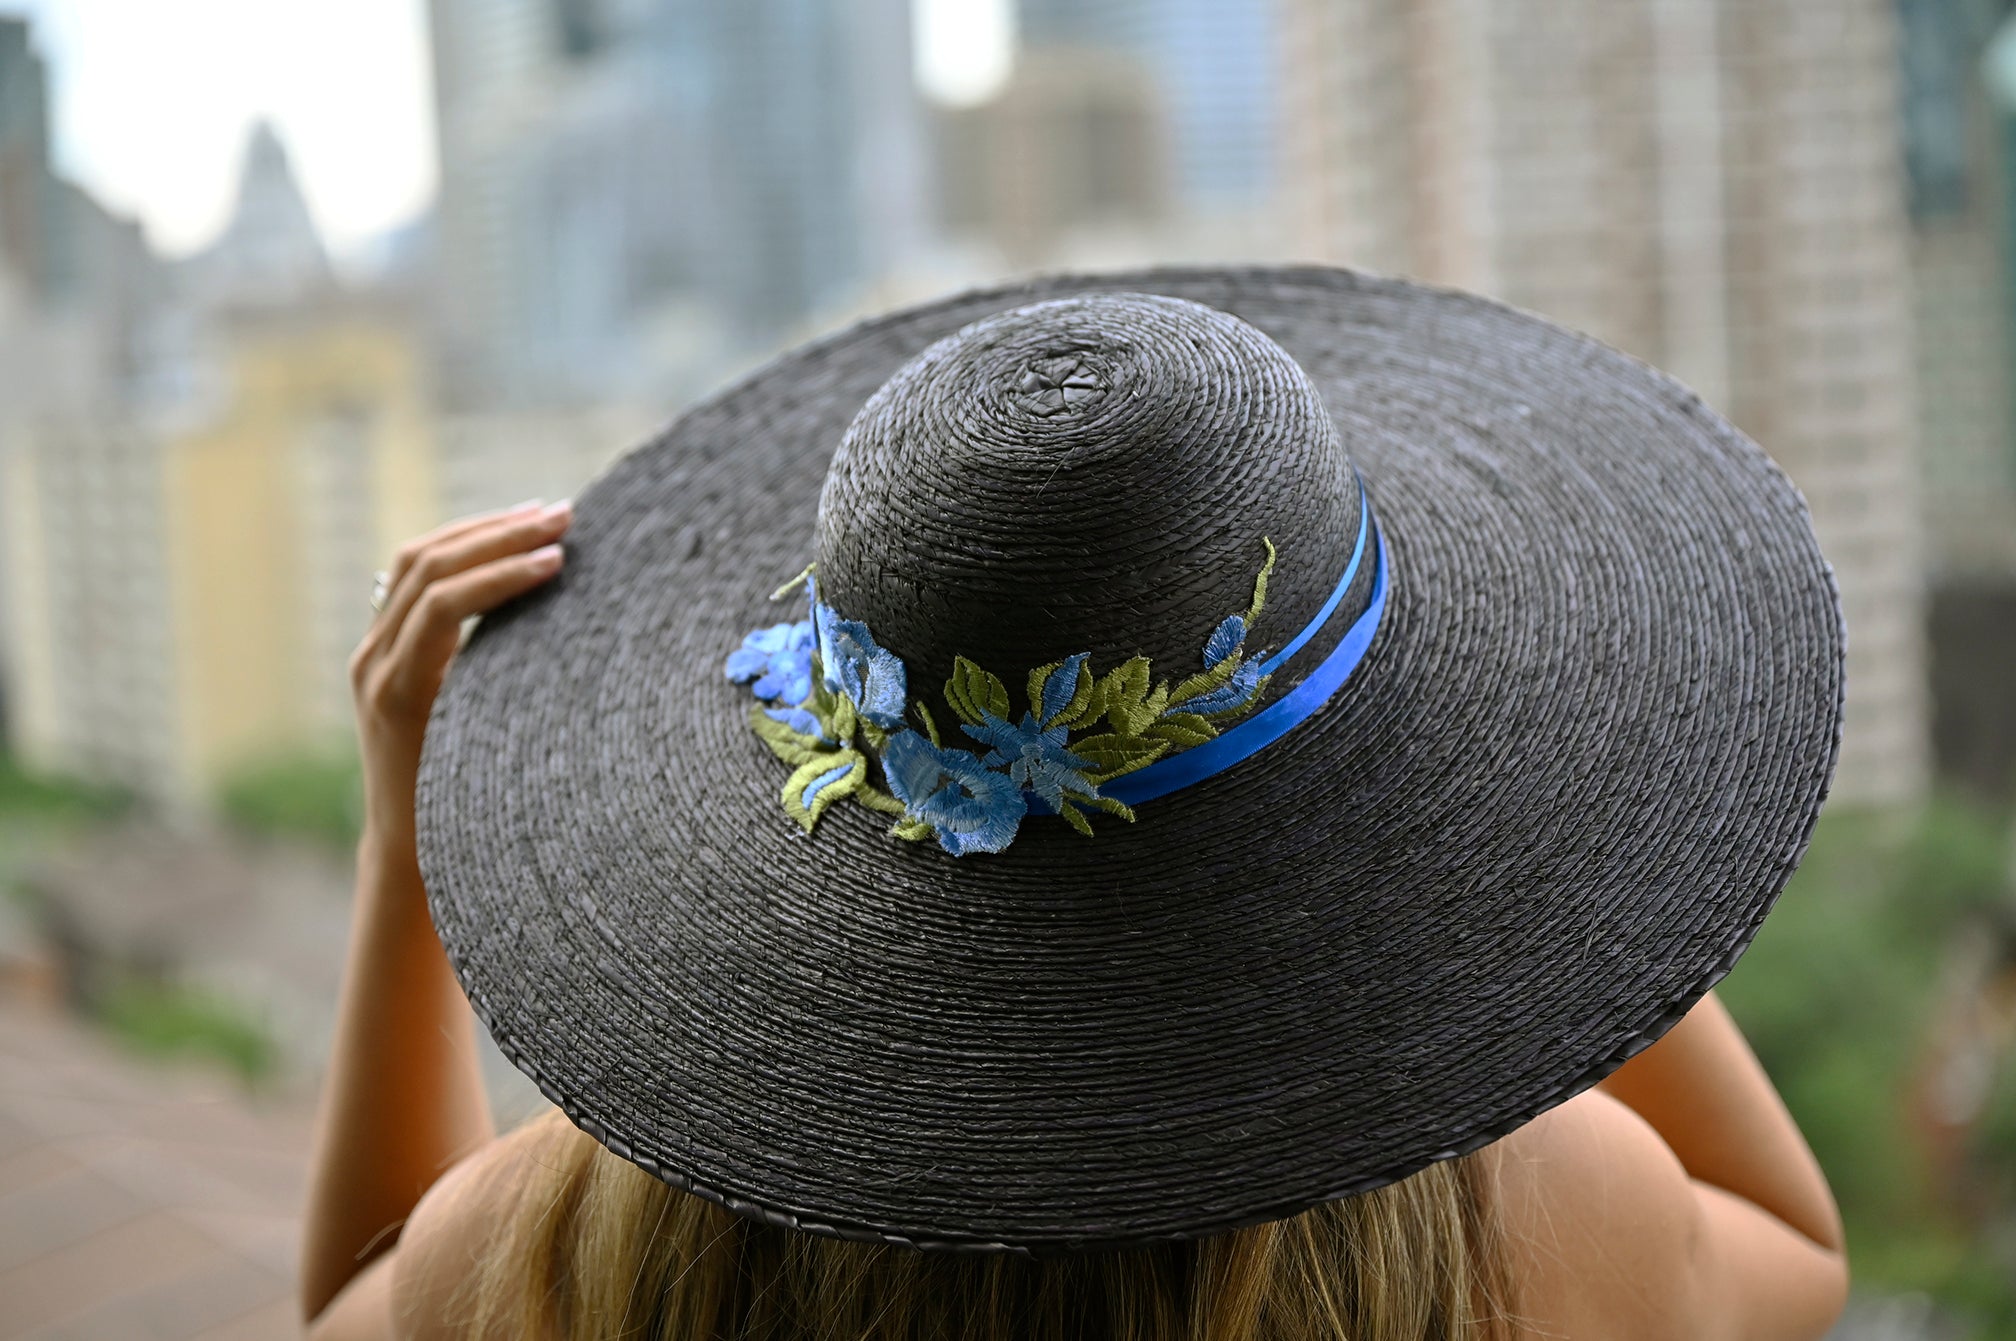 Beach Straw Hat - Lace Embellished